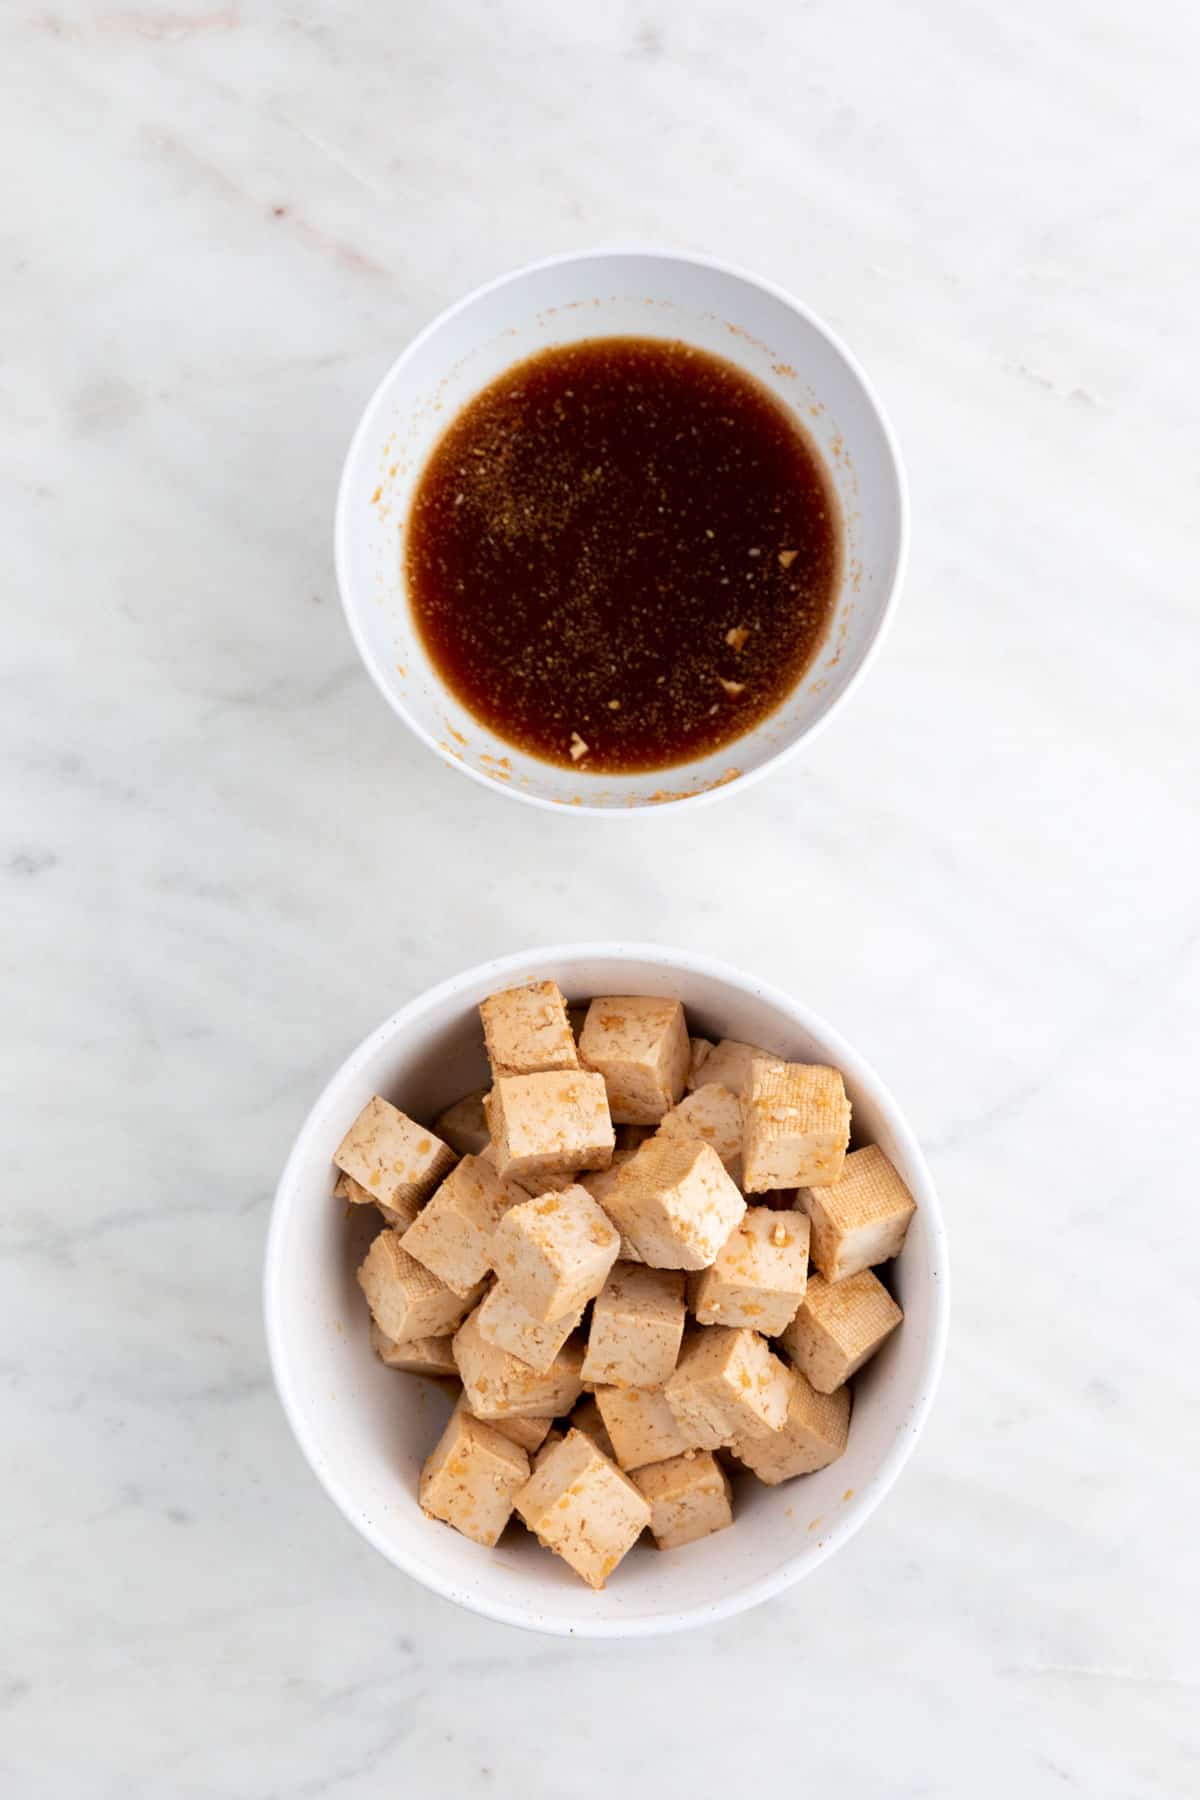 Marinated tofu cubes in a bowl and a bowl with the marinade liquid after draining the tofu cubes.